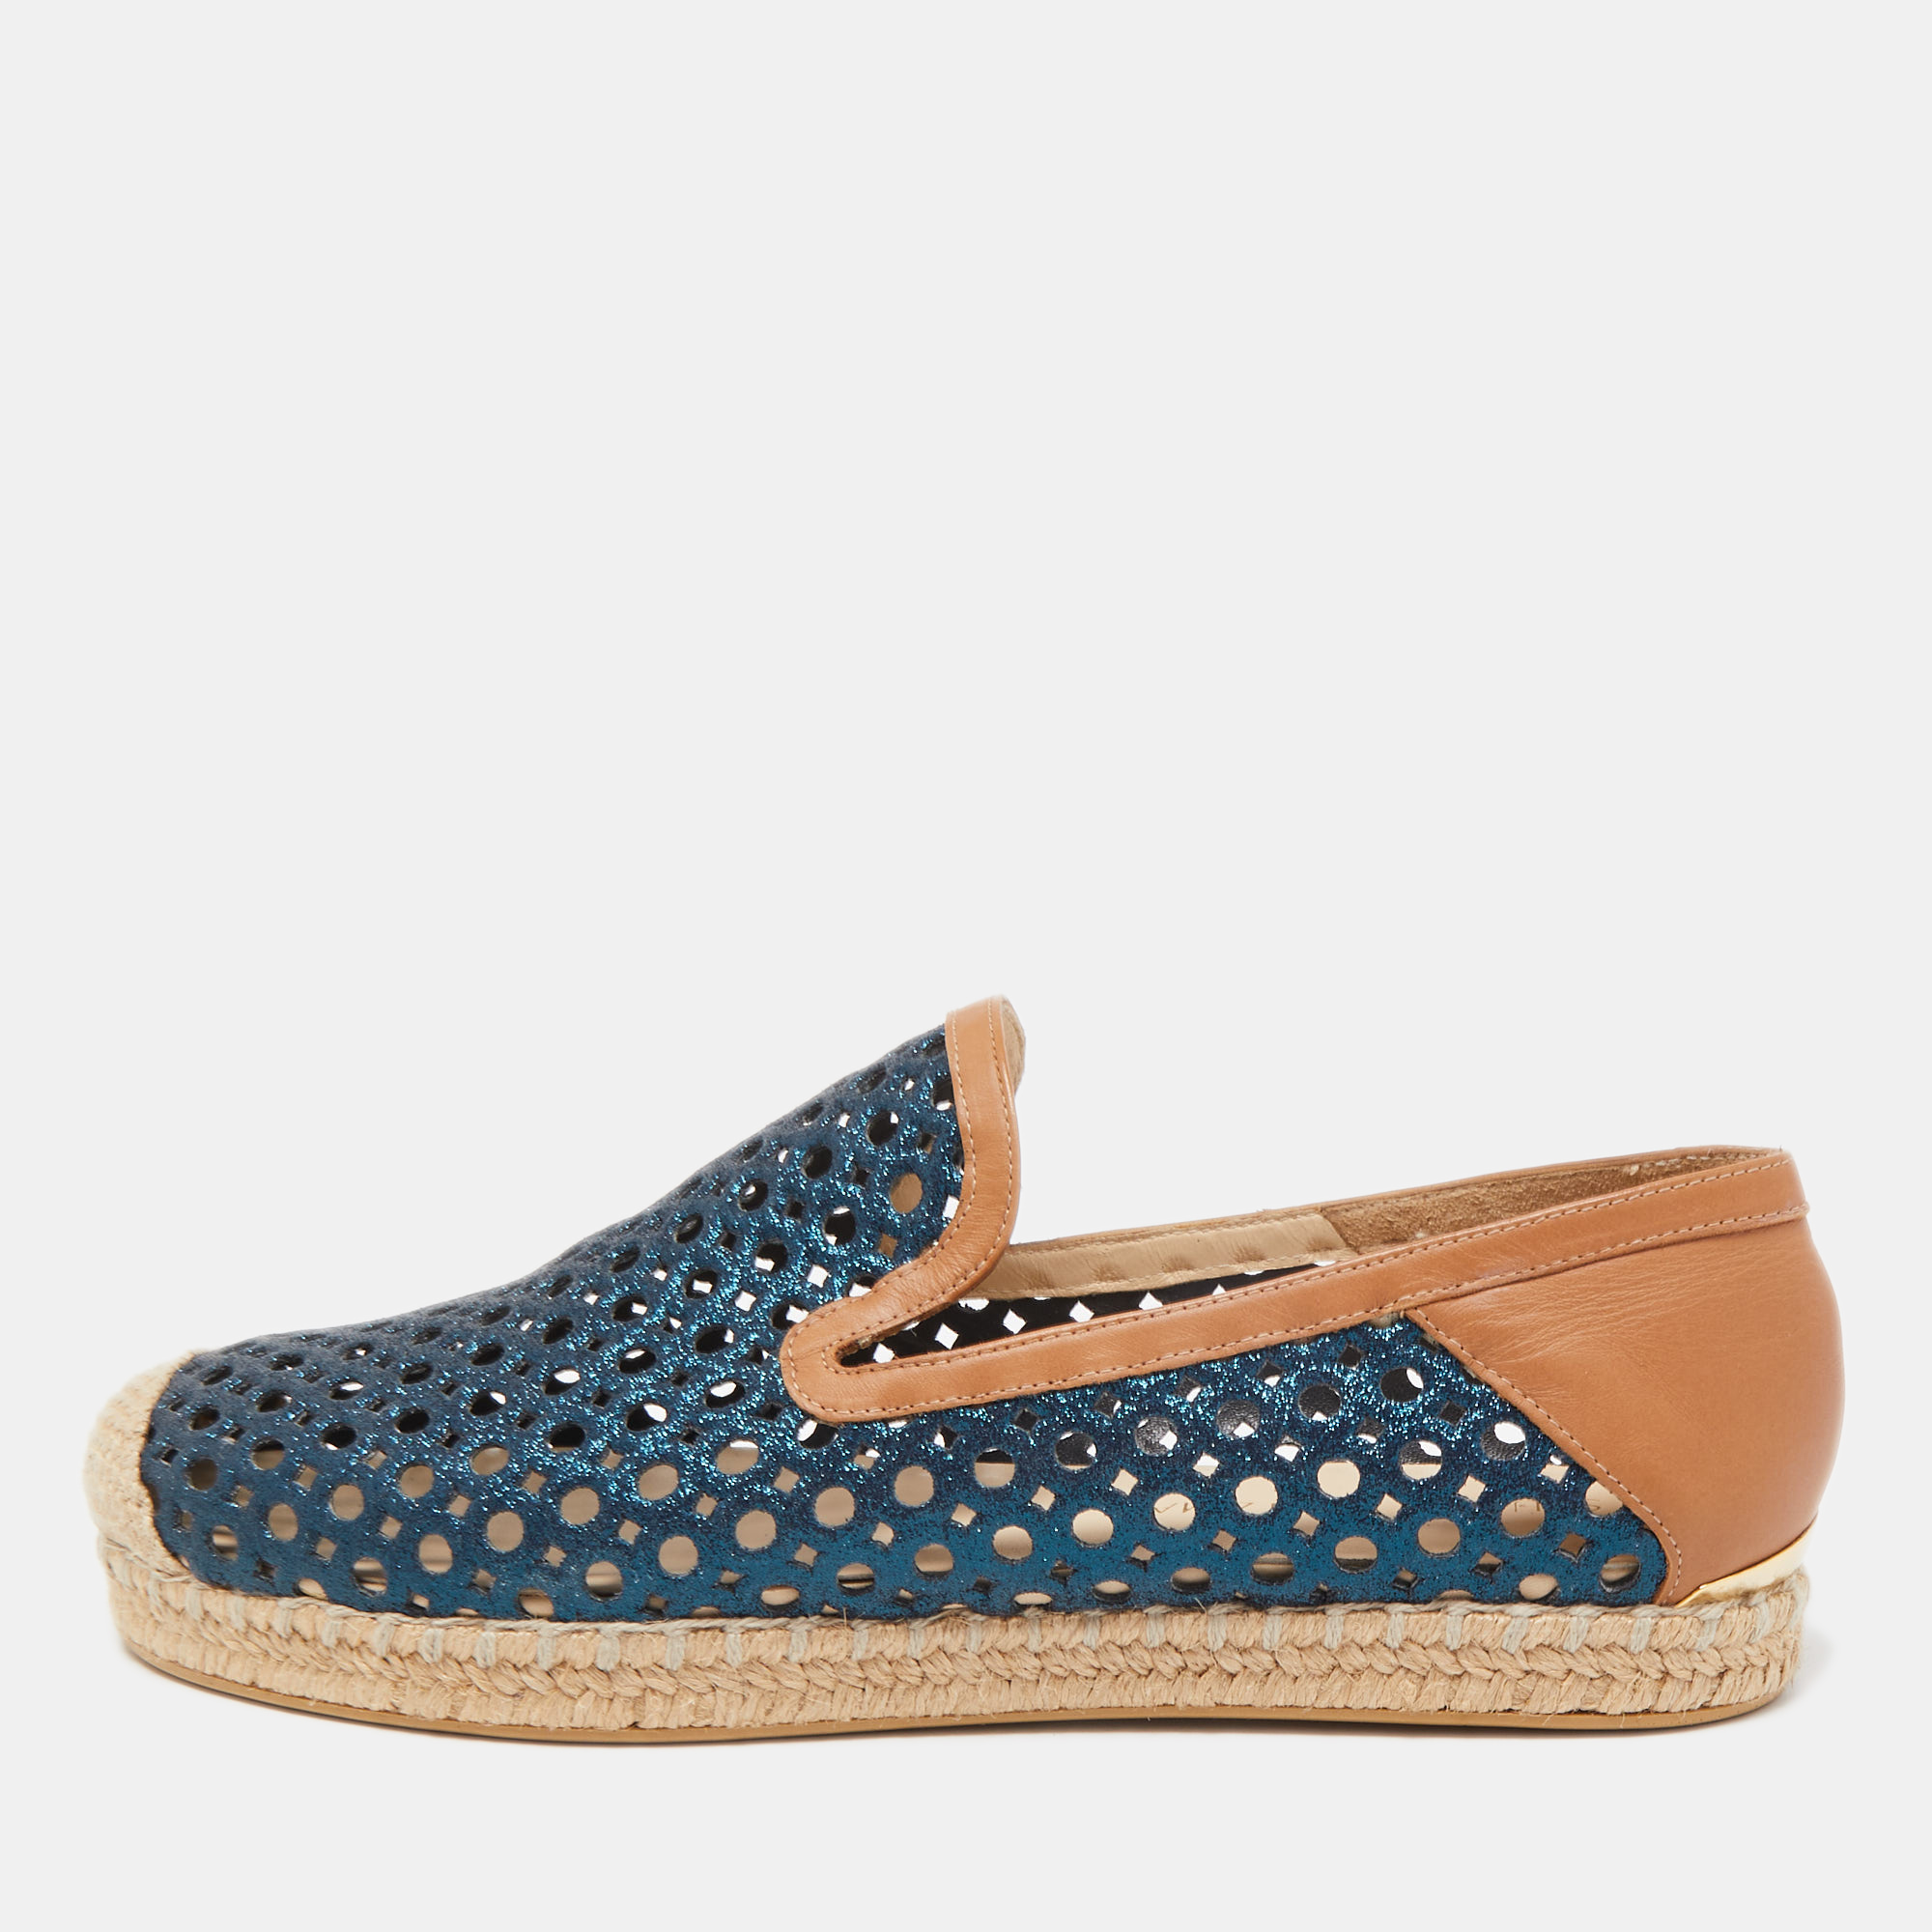 Pre-owned Stuart Weitzman Metallic Blue/brown Leather And Glitter Laser Cut County Espadrilles Size 39